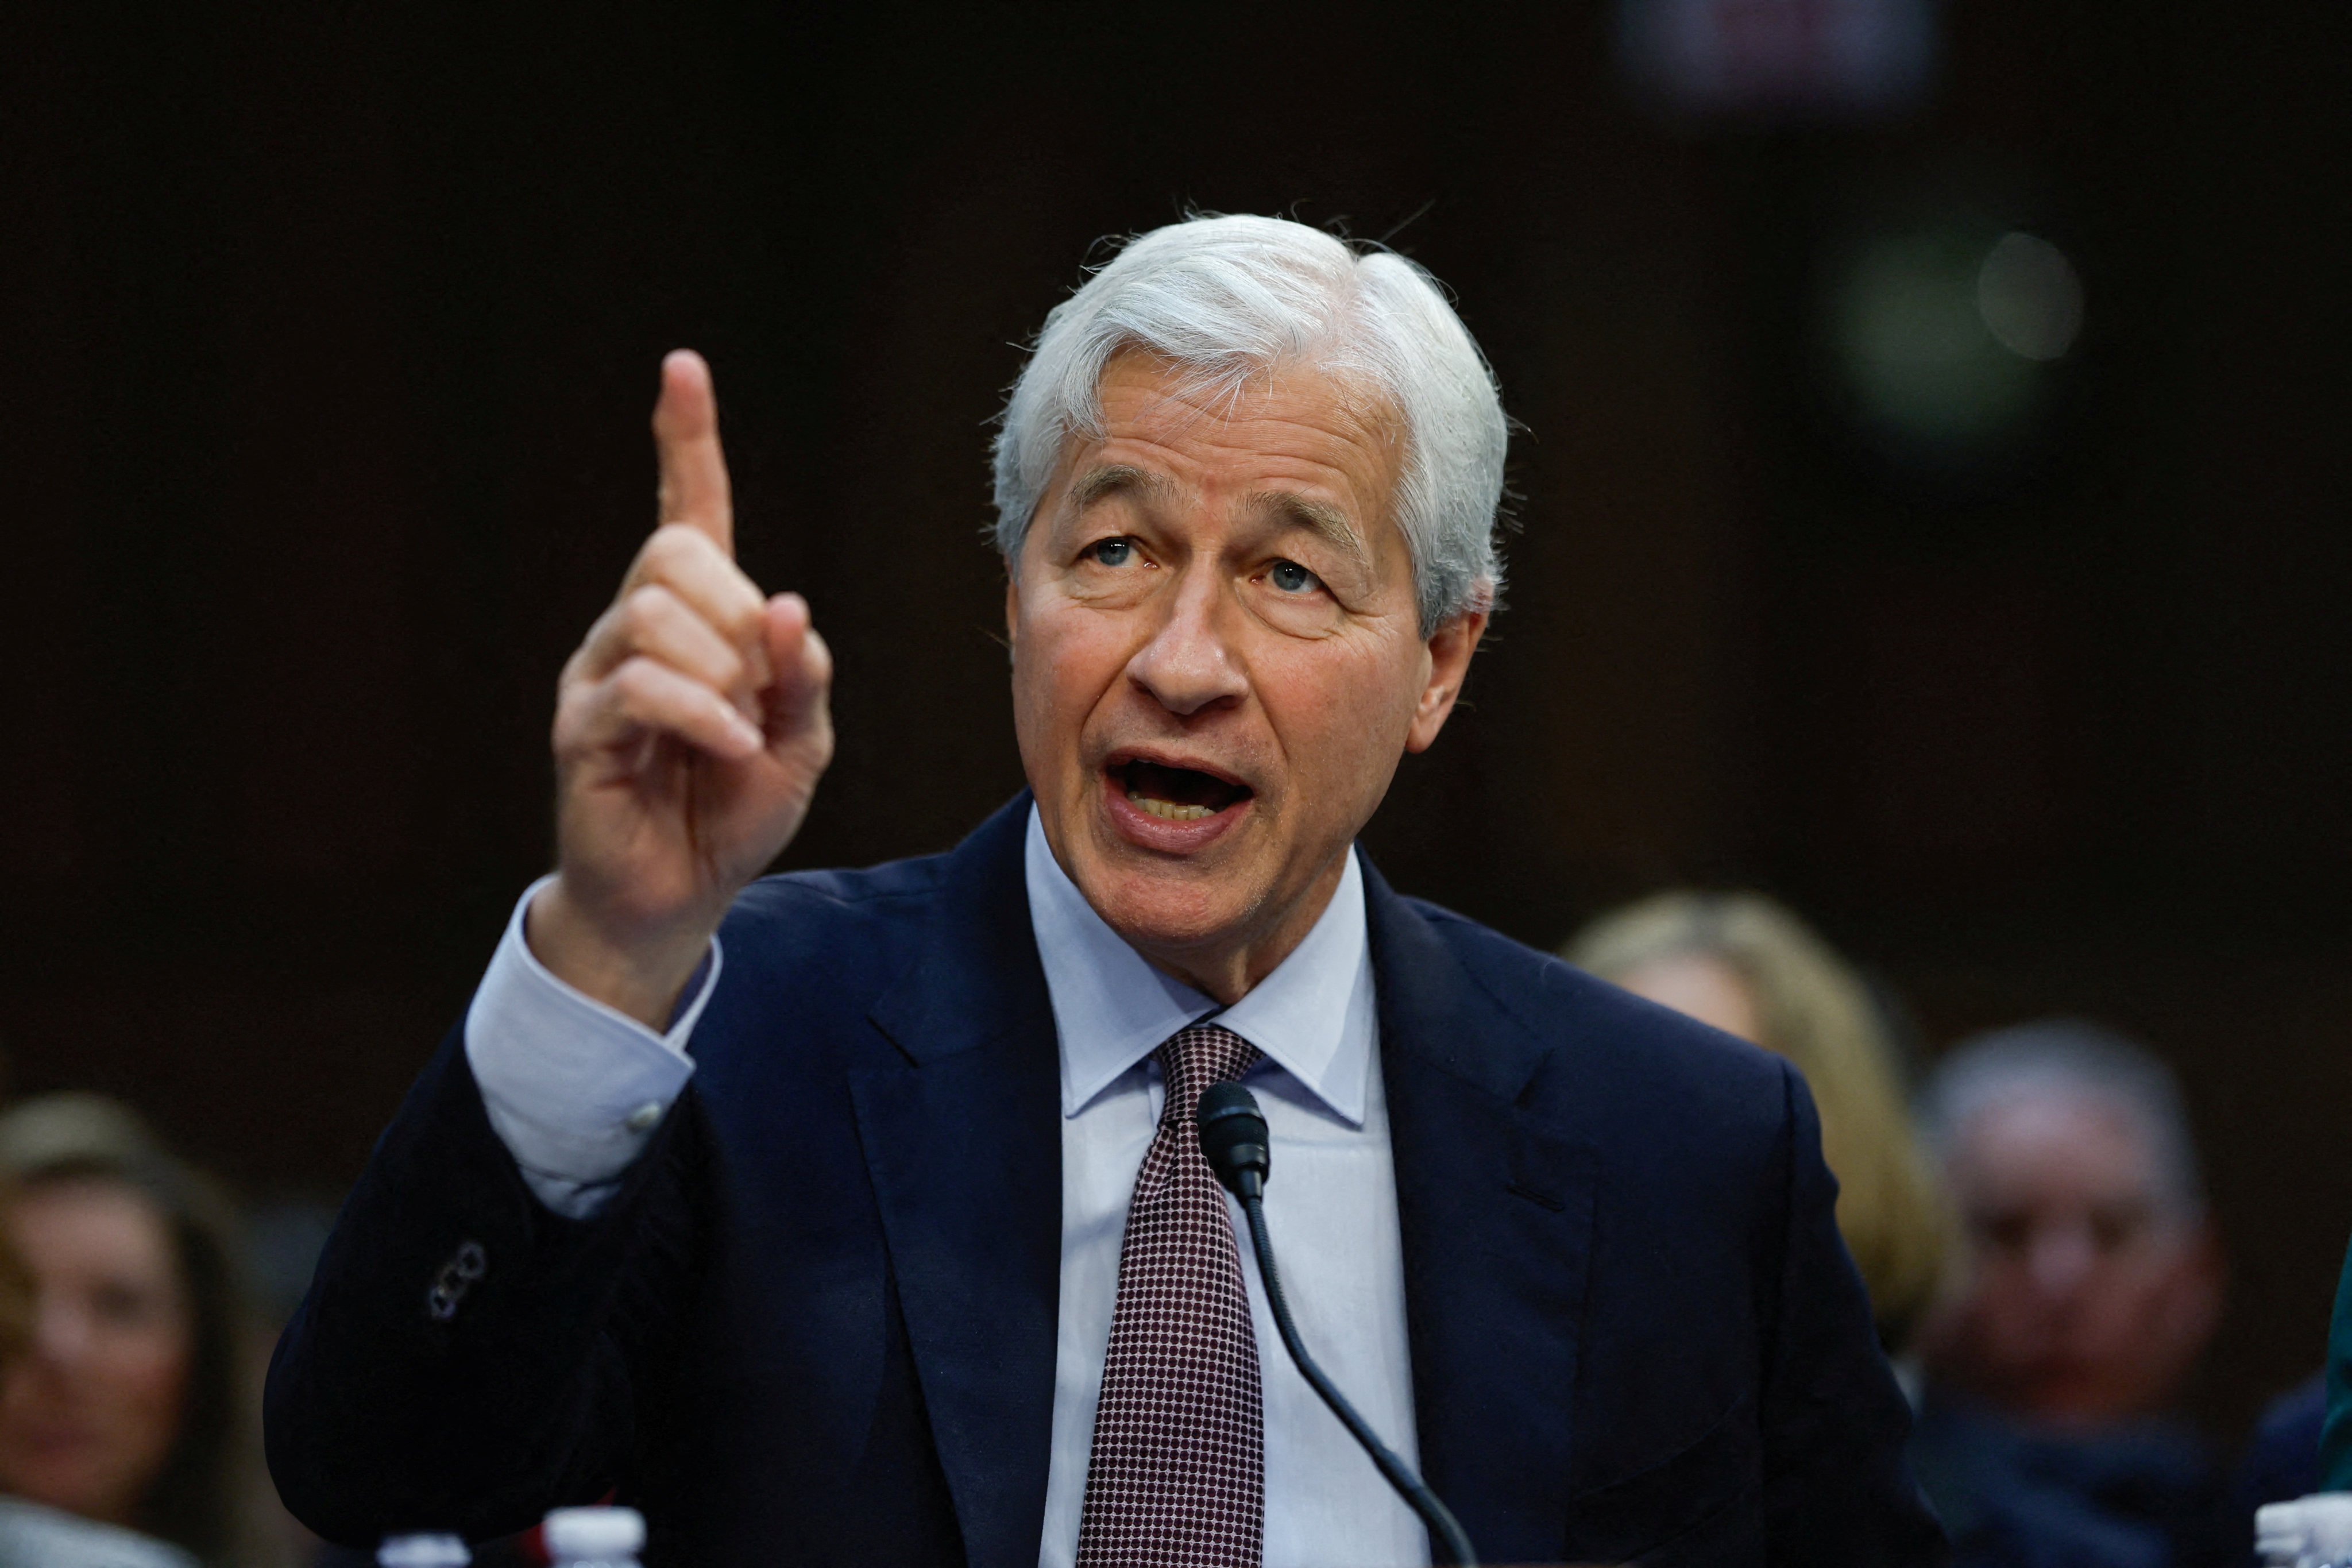 JPMorgan Chase CEO Jamie Dimon has likened AI to the ‘printing press, the steam engine, electricity, computing and the internet’. Photo: Reuters